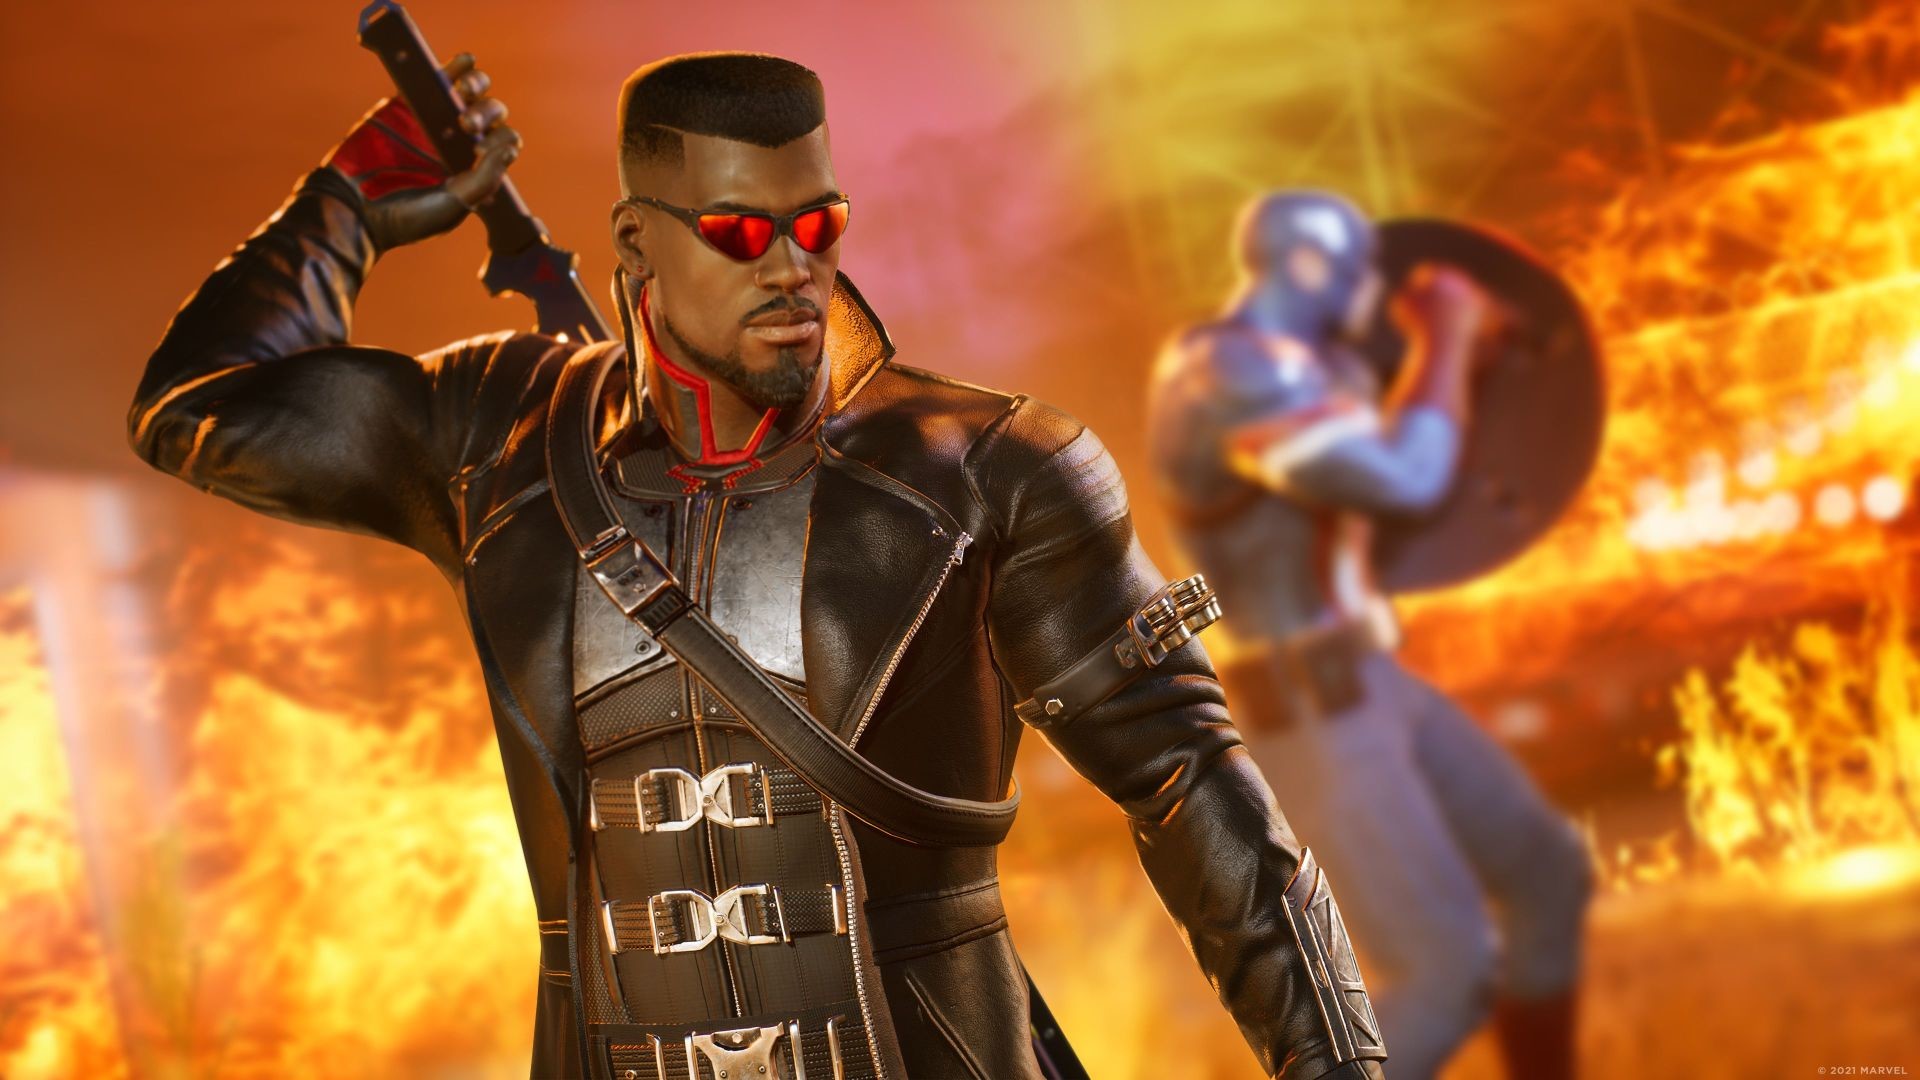 Marvel's Midnight Suns Locks in a December Release Date